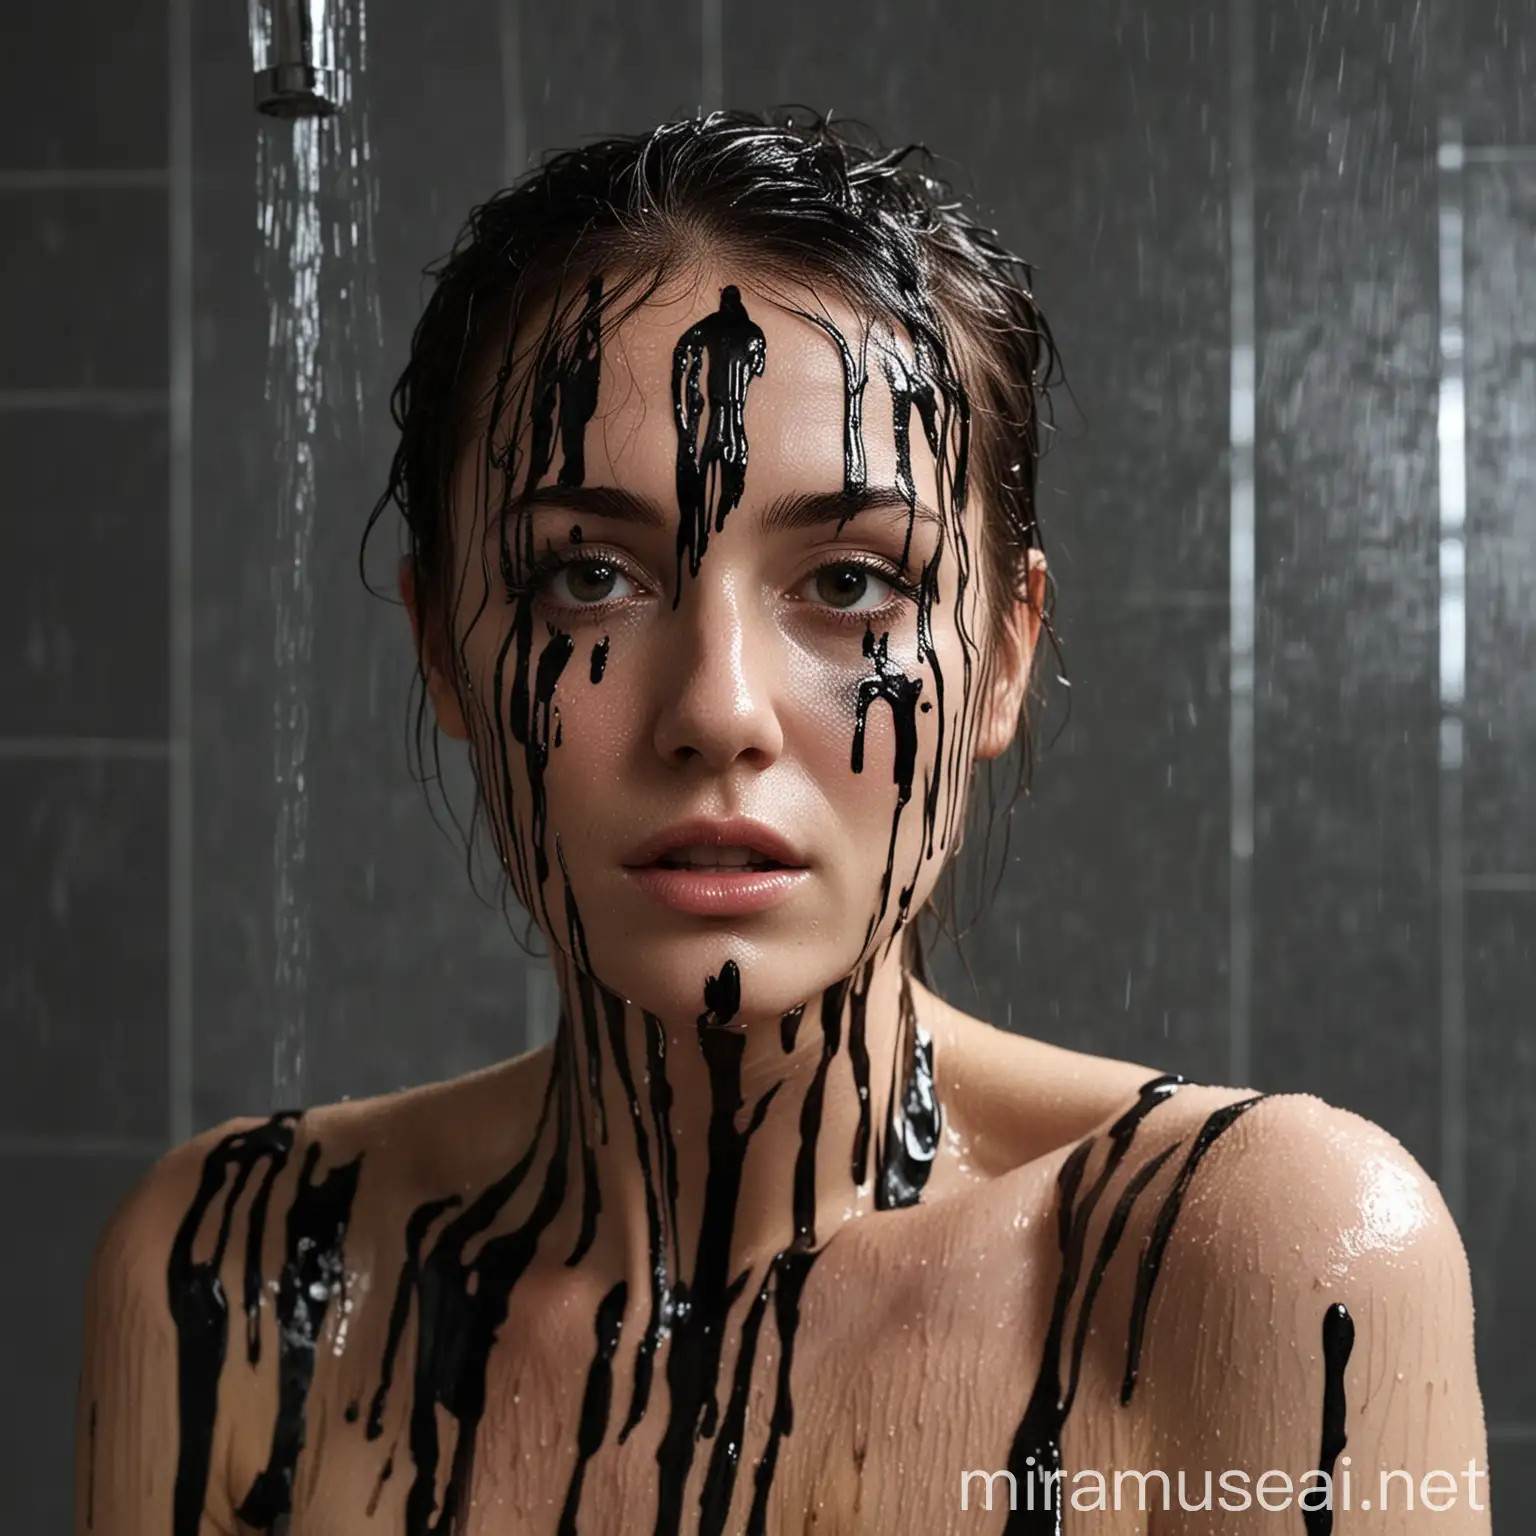 Faye Webster in the shower with blacck paint sad and dark